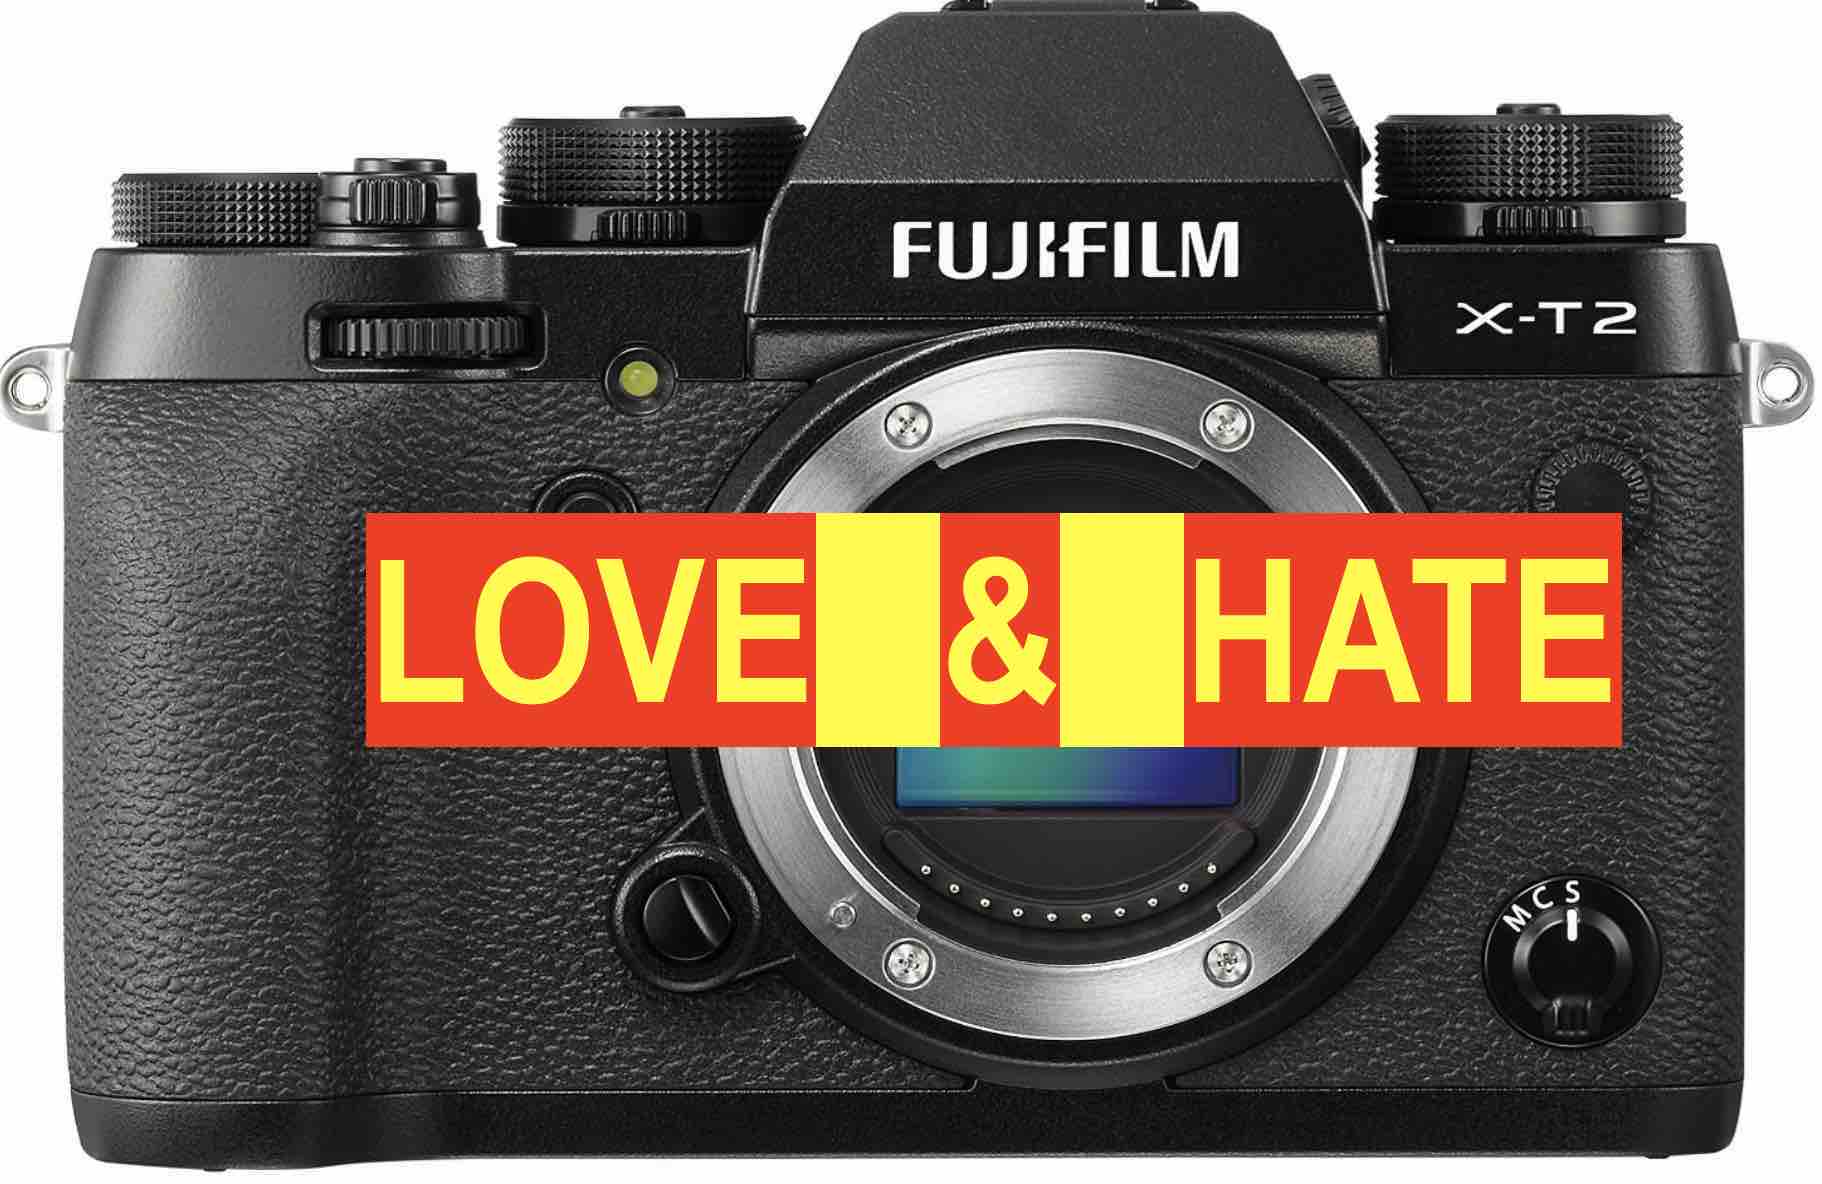 Fujifilm X-T2: Most Loved but Least Reliable Camera I've Ever